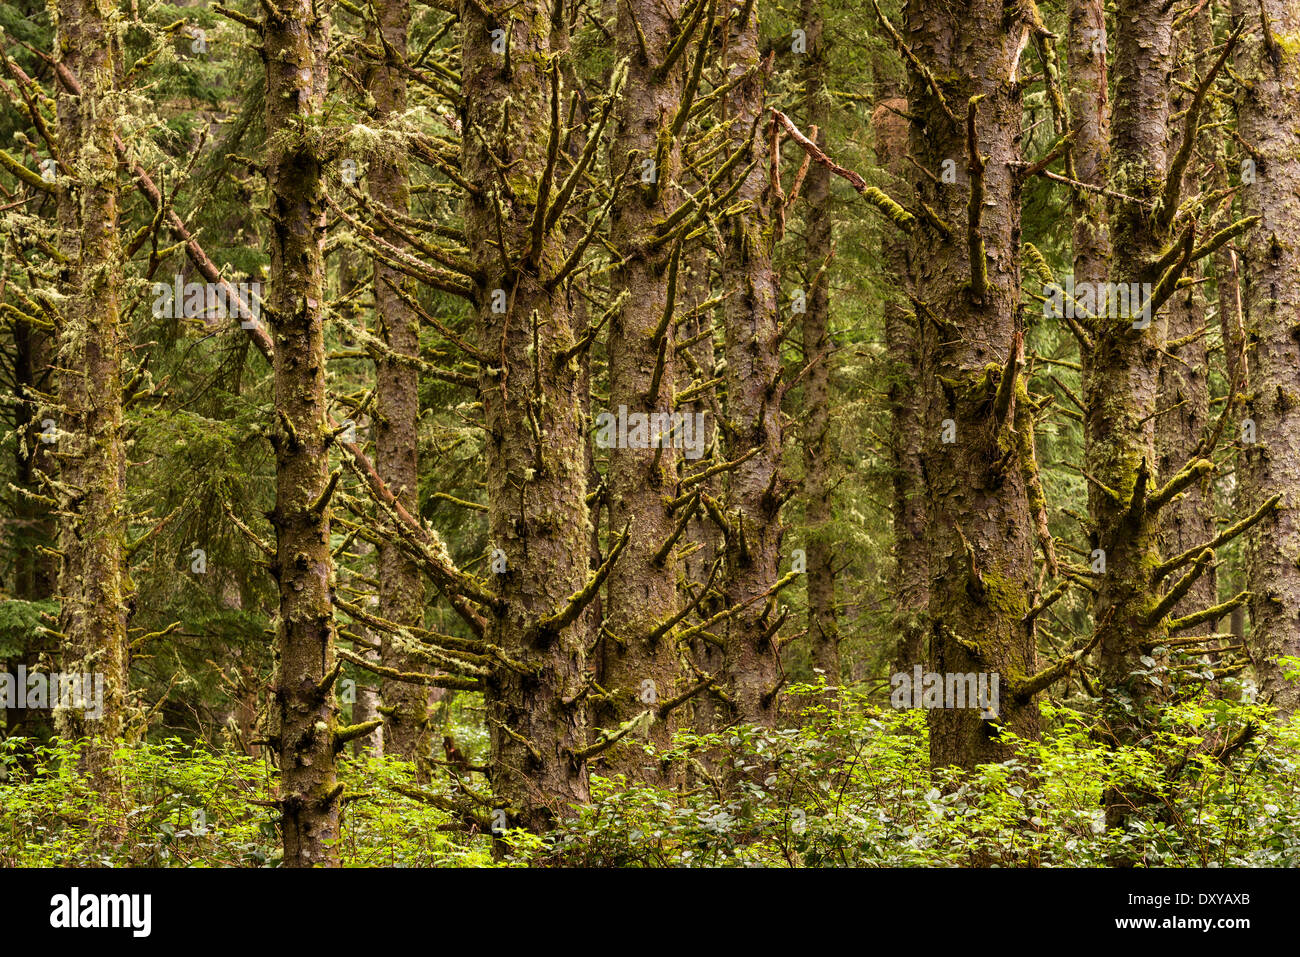 Sitka Spruce forest at Cape Meares State Scenic Viewpoint. Stock Photo